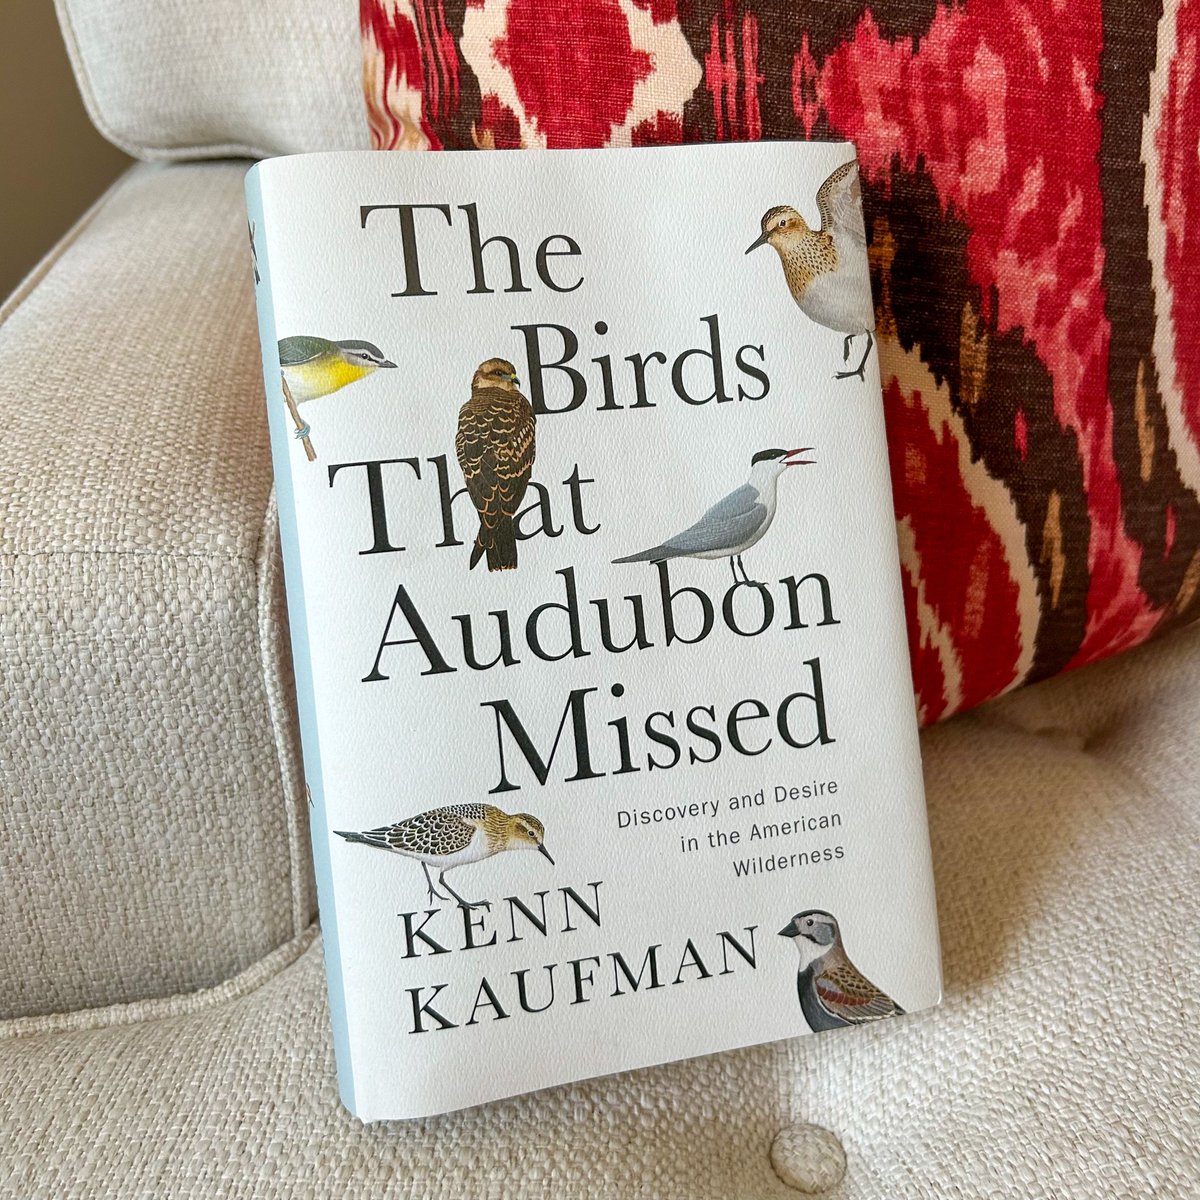 Happy publication day to THE BIRDS THAT AUDUBON MISSED! @KennKaufman Out now! 🦤 bit.ly/3yck1NF